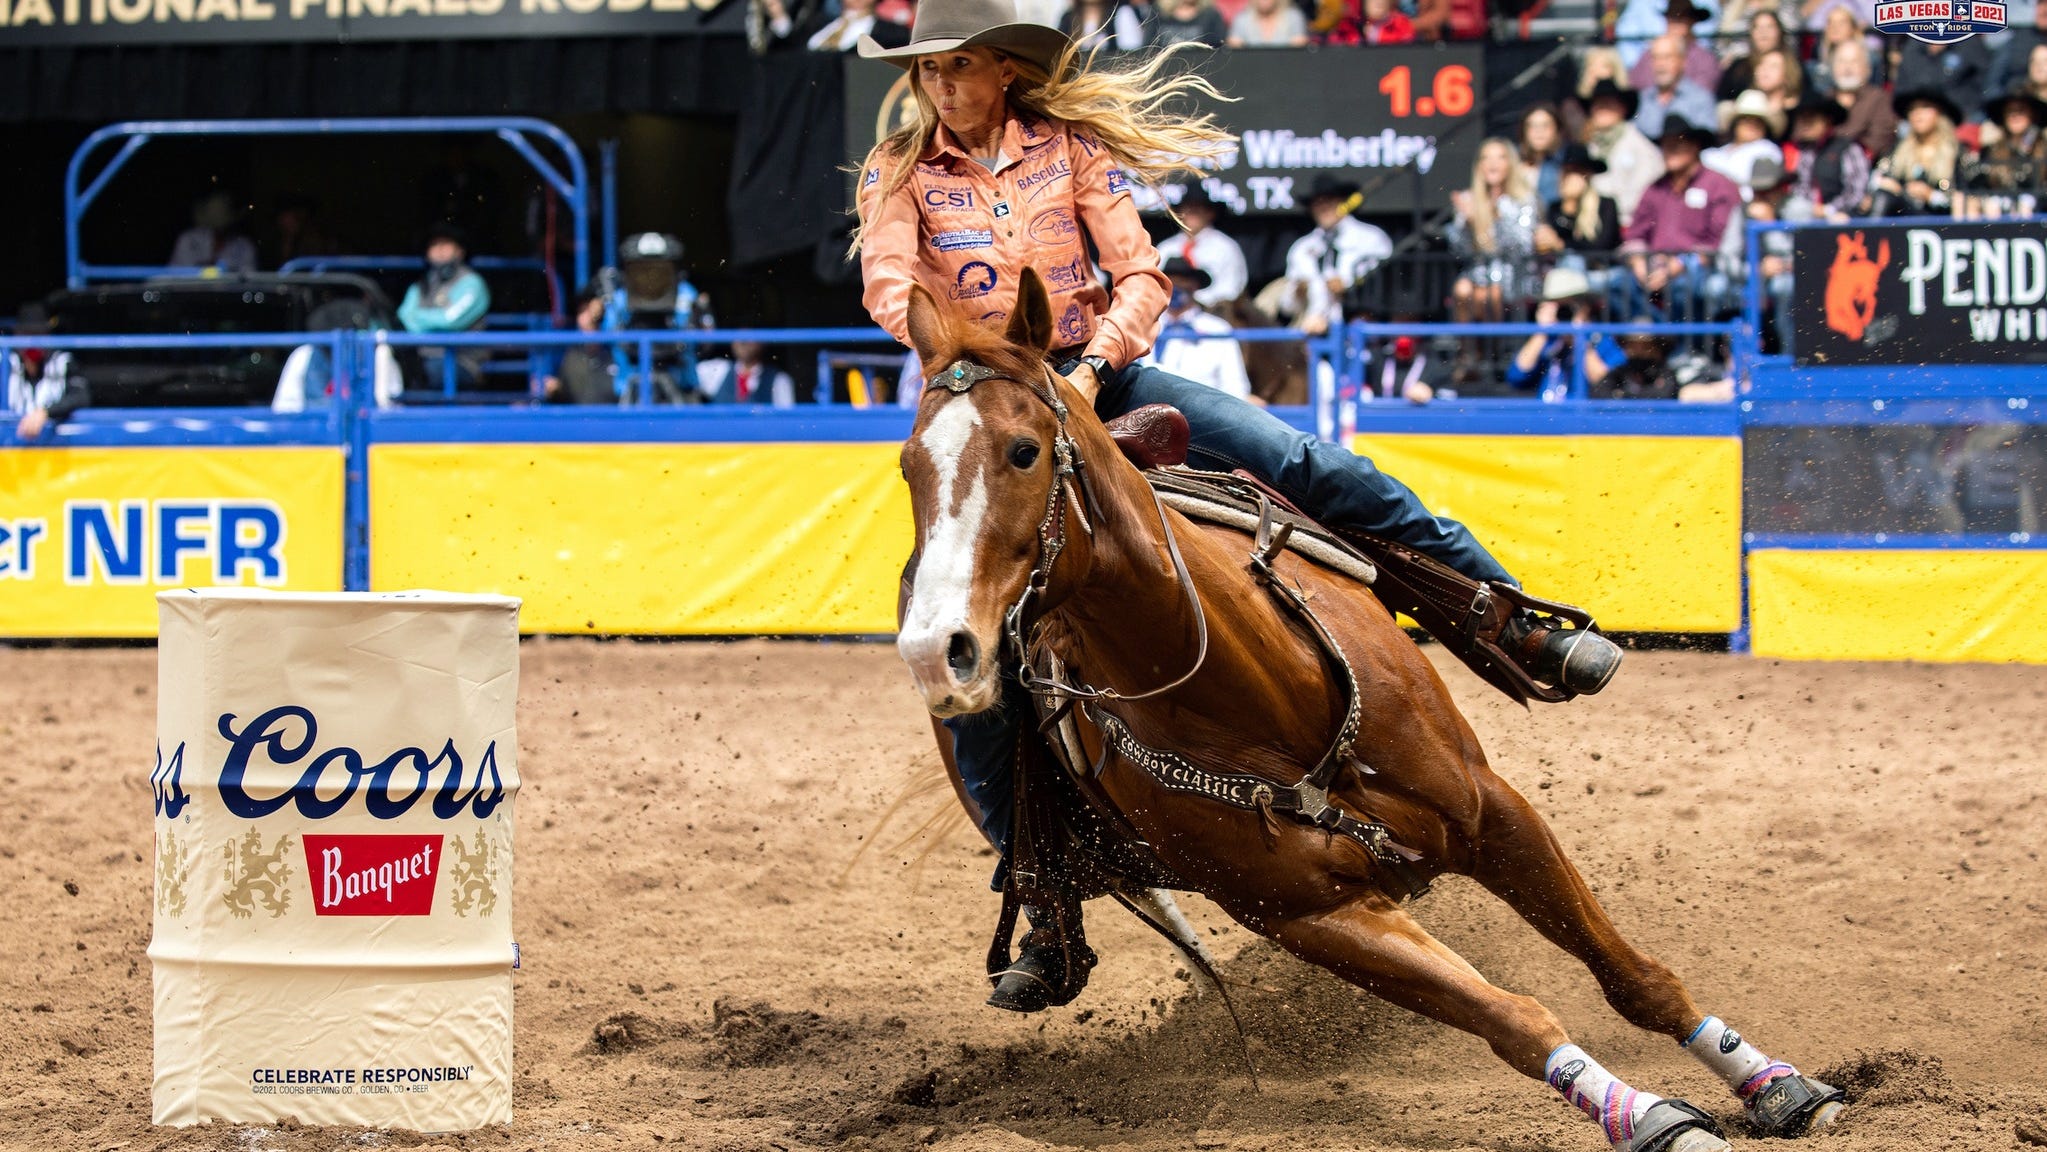 Fivetime NFR barrel racer Cheyenne Wimberley takes lead at ABC Pro Rodeo